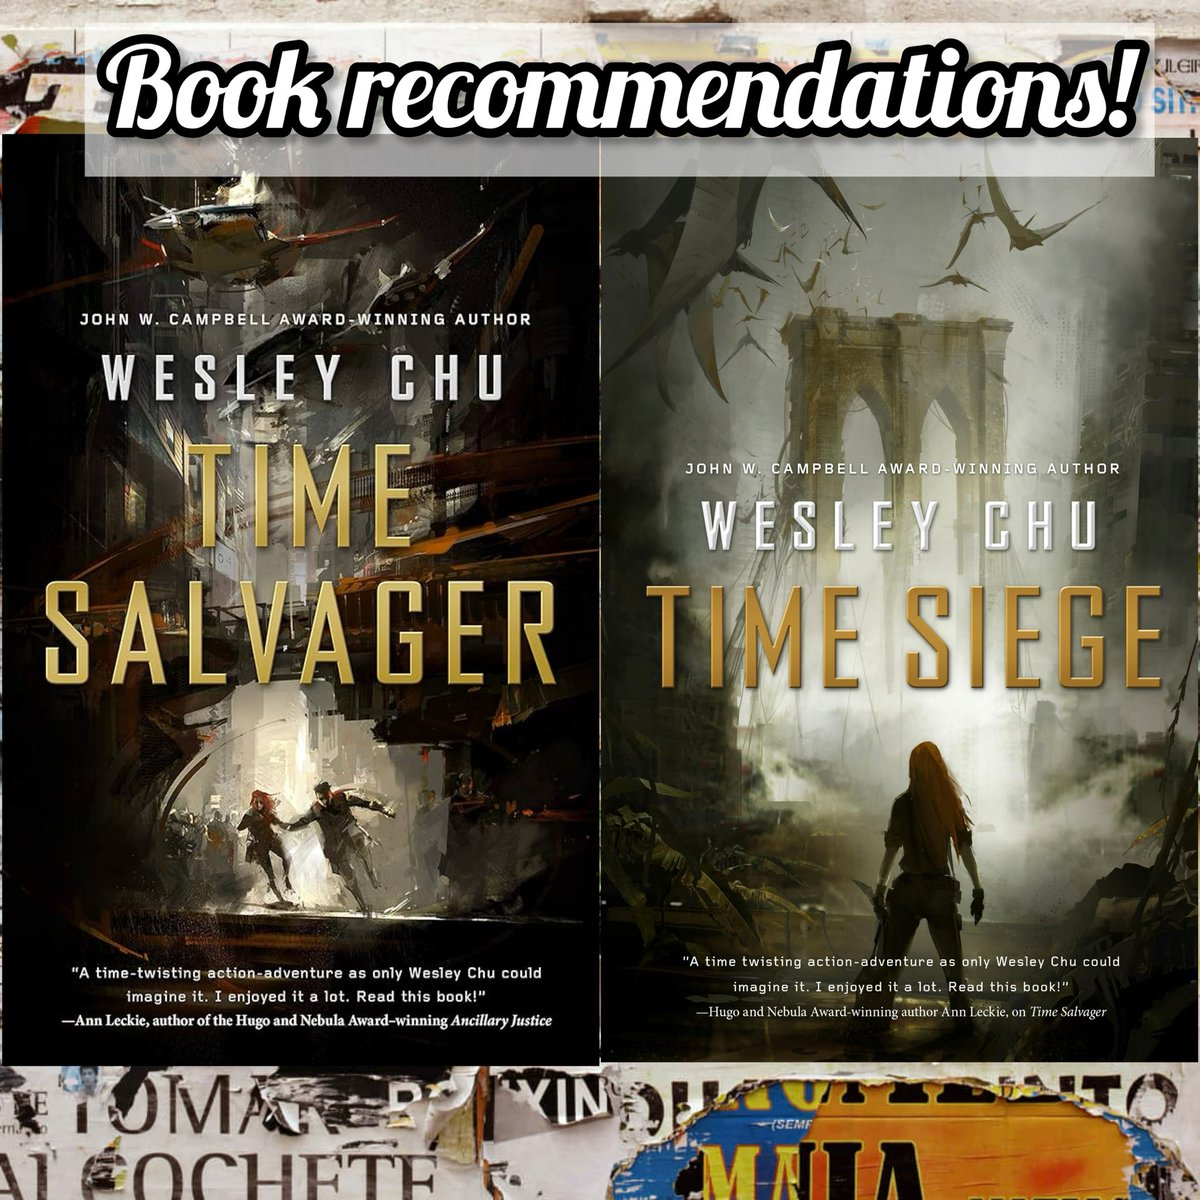 Today I wanted to recommend these two amazing books by @wes_chu and hope and pray that @torbooks will someday give us a third book. These would make an incredible film or tv series. Give them a read!!